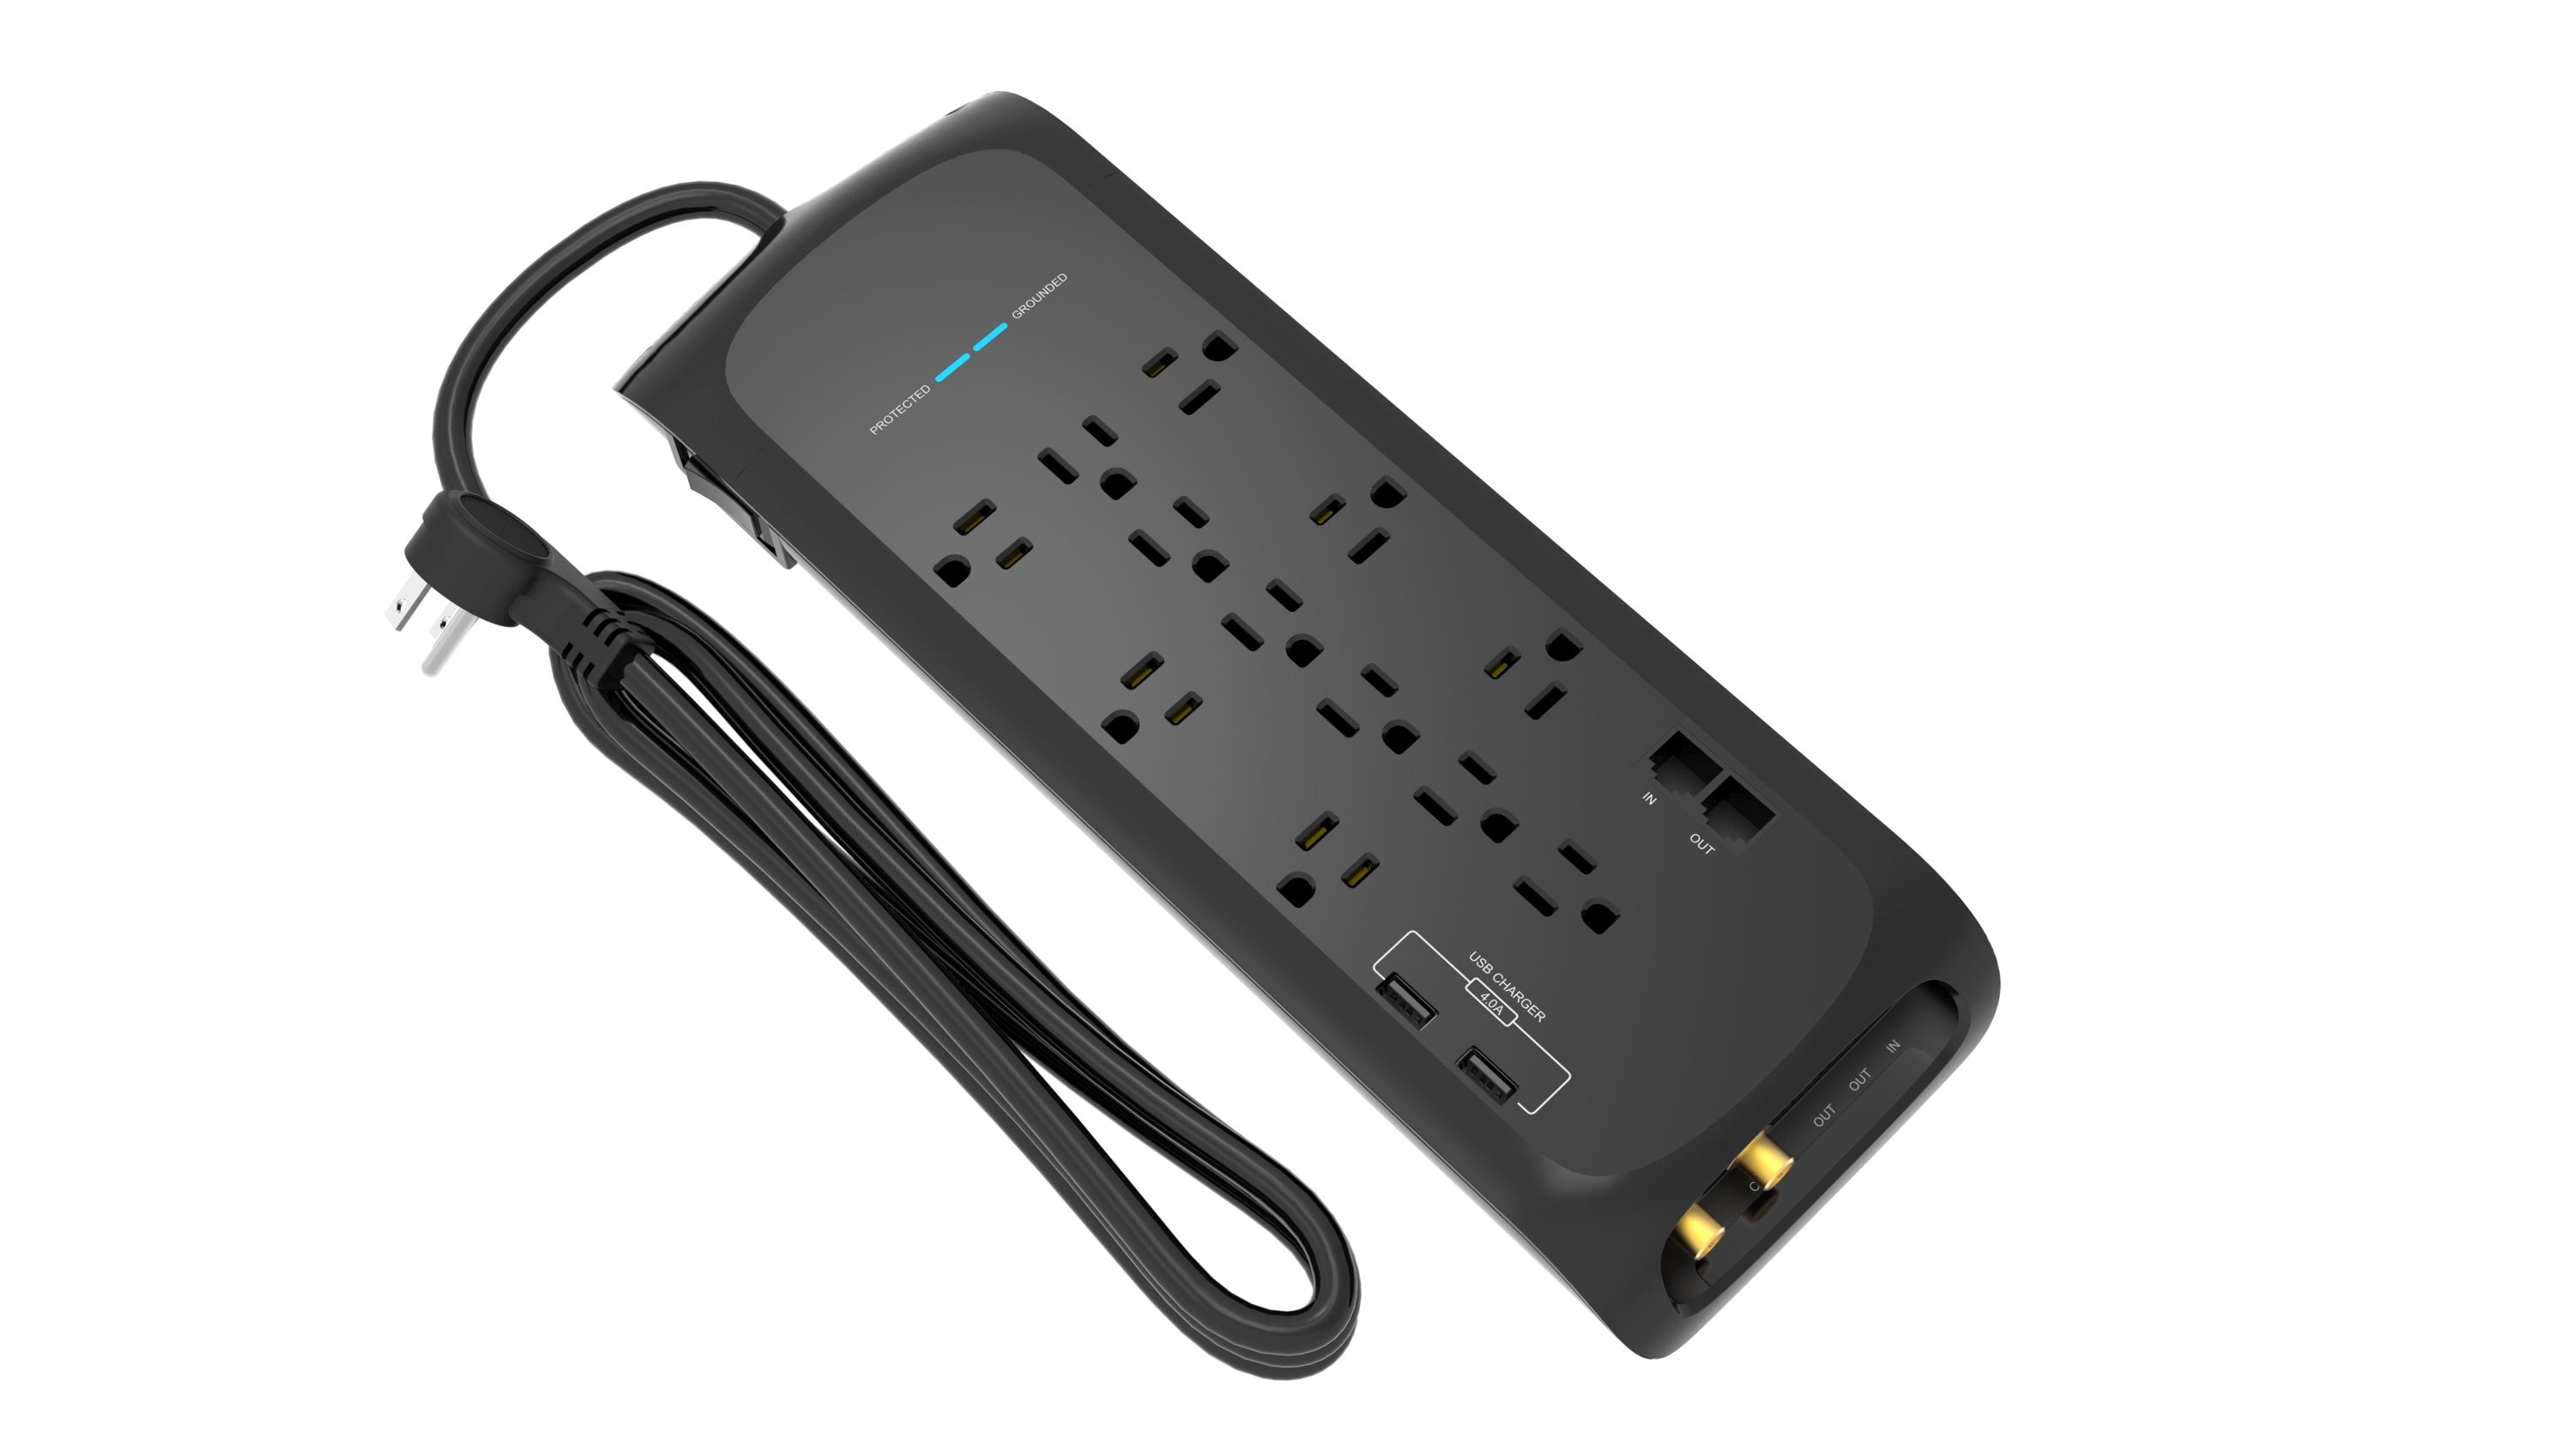  BLACK+DECKER Power Strip Extension Cord with 8 Grounded  Outlets, USB Port, USB-C Port, 5.5 ft Cable - Indoor Charging Station  Outlet Strip with Flat Plug - Premium Electrical Outlets & Accessories 